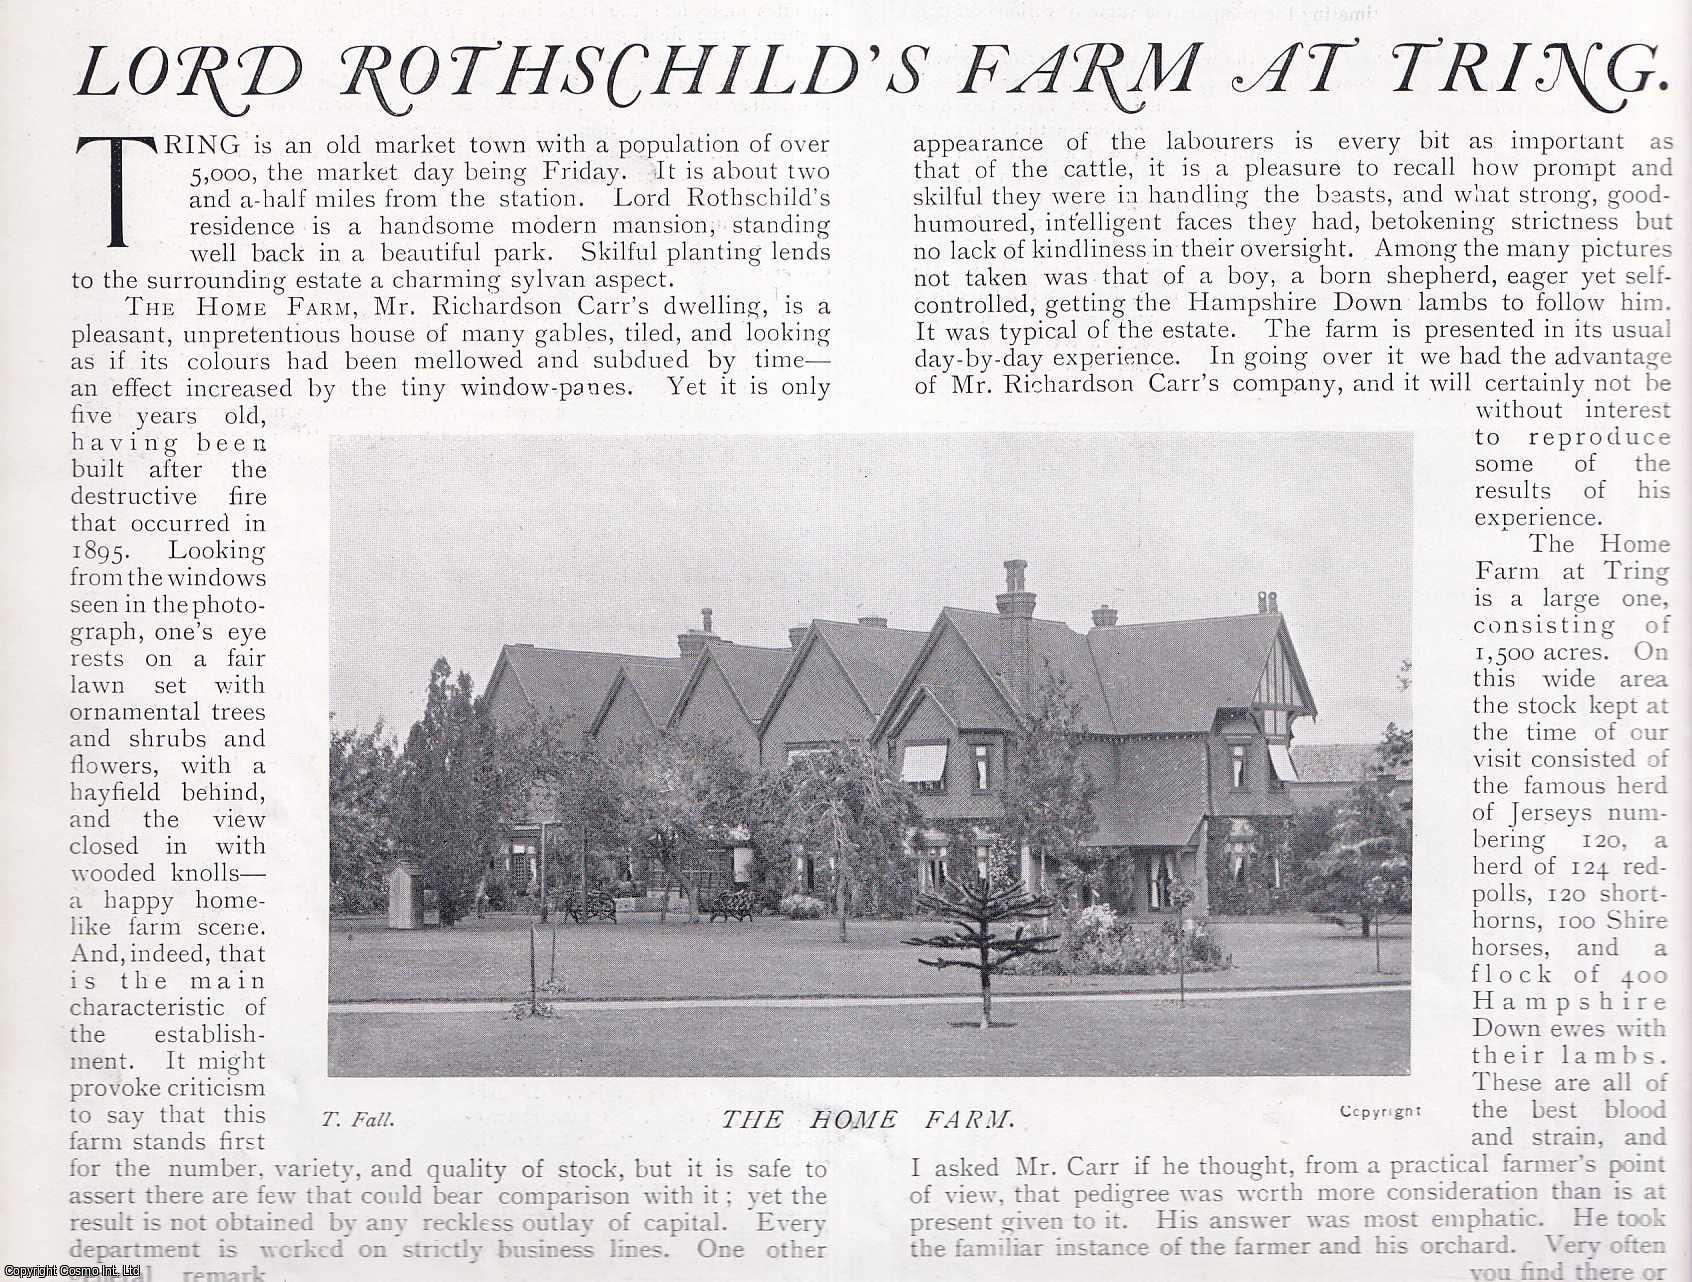 COUNTRY LIFE - Lord Rothchild's Farm and Estate at Tring. Several pictures and accompanying text, removed from an original issue of Country Life Magazine, 1900.